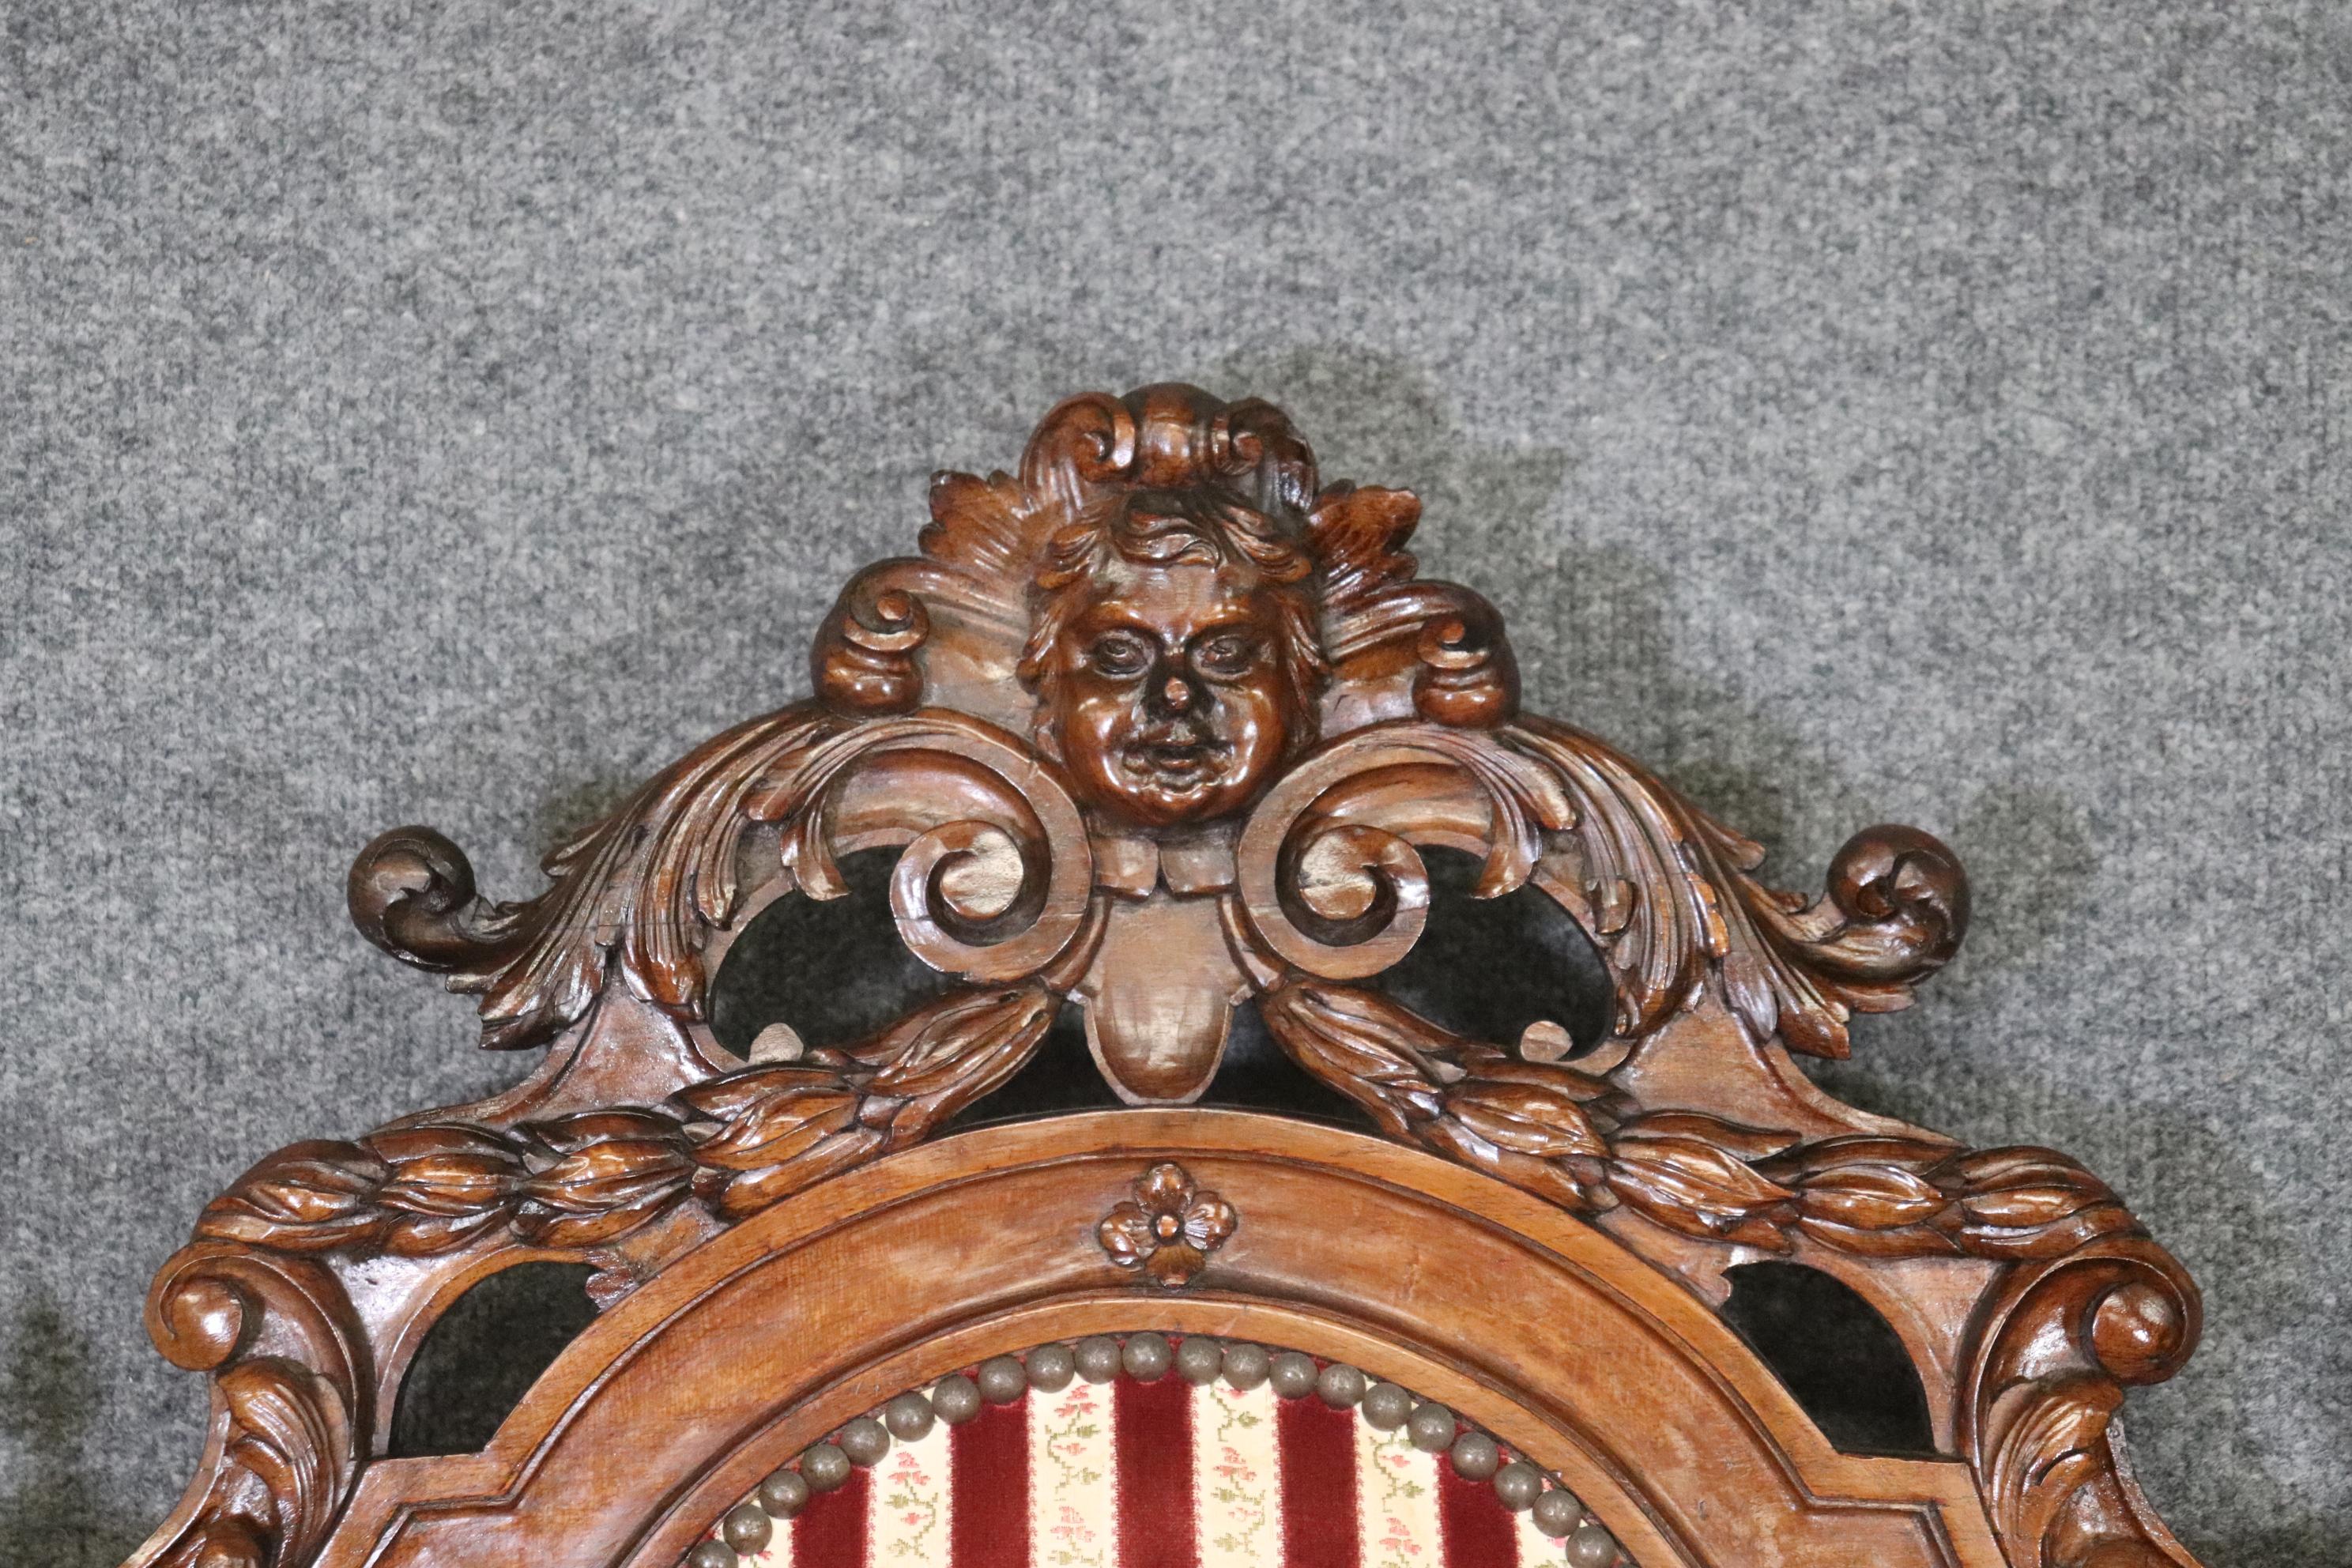 Large Heavily Carved Figural Victorian Walnut Throne Chair with Putti Cherubs  For Sale 7